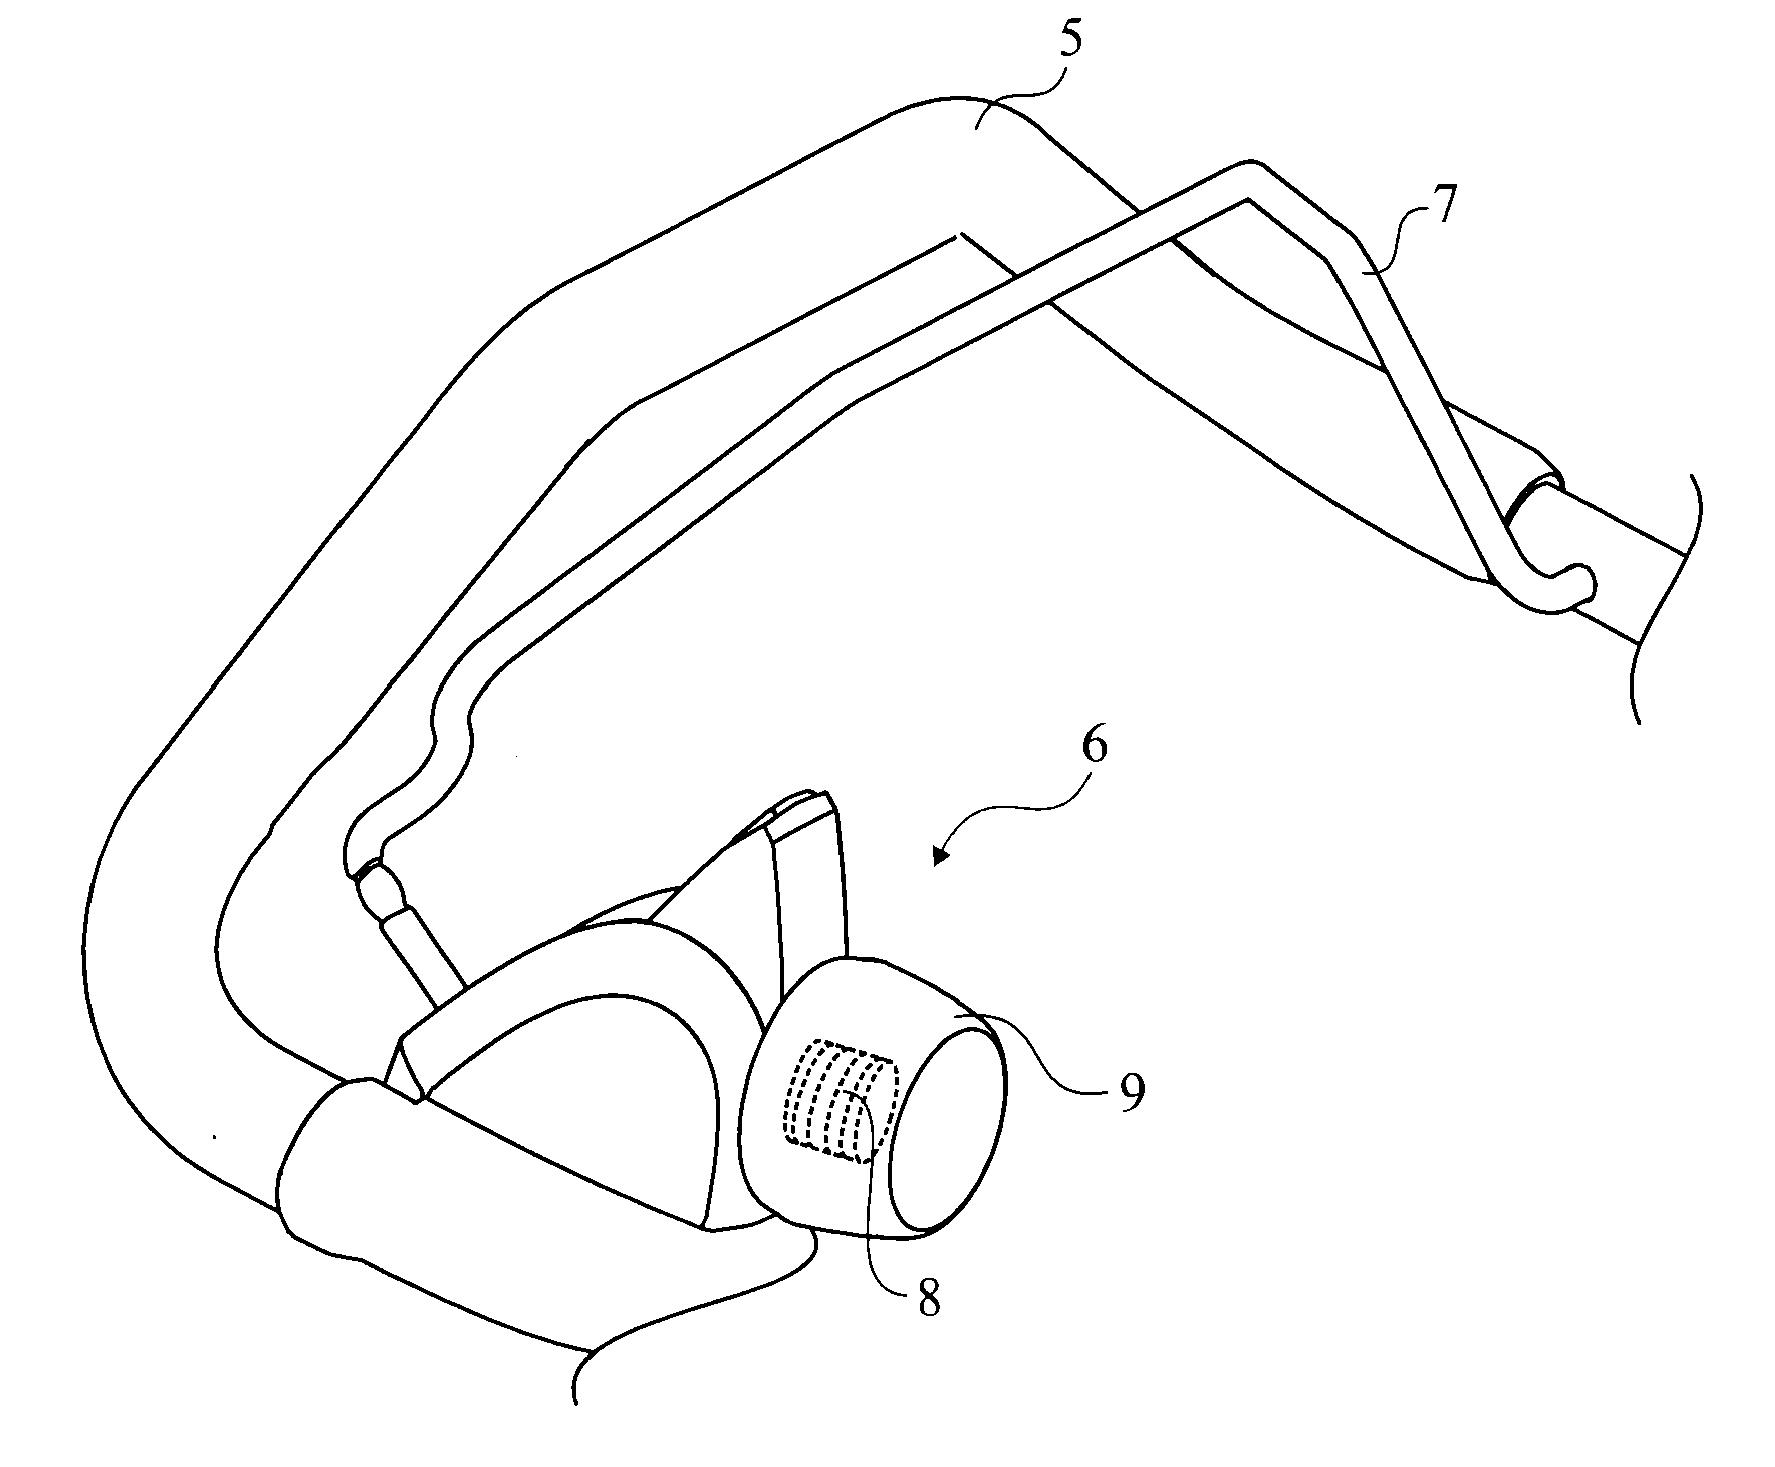 Drive hand-control system for a lawn mower